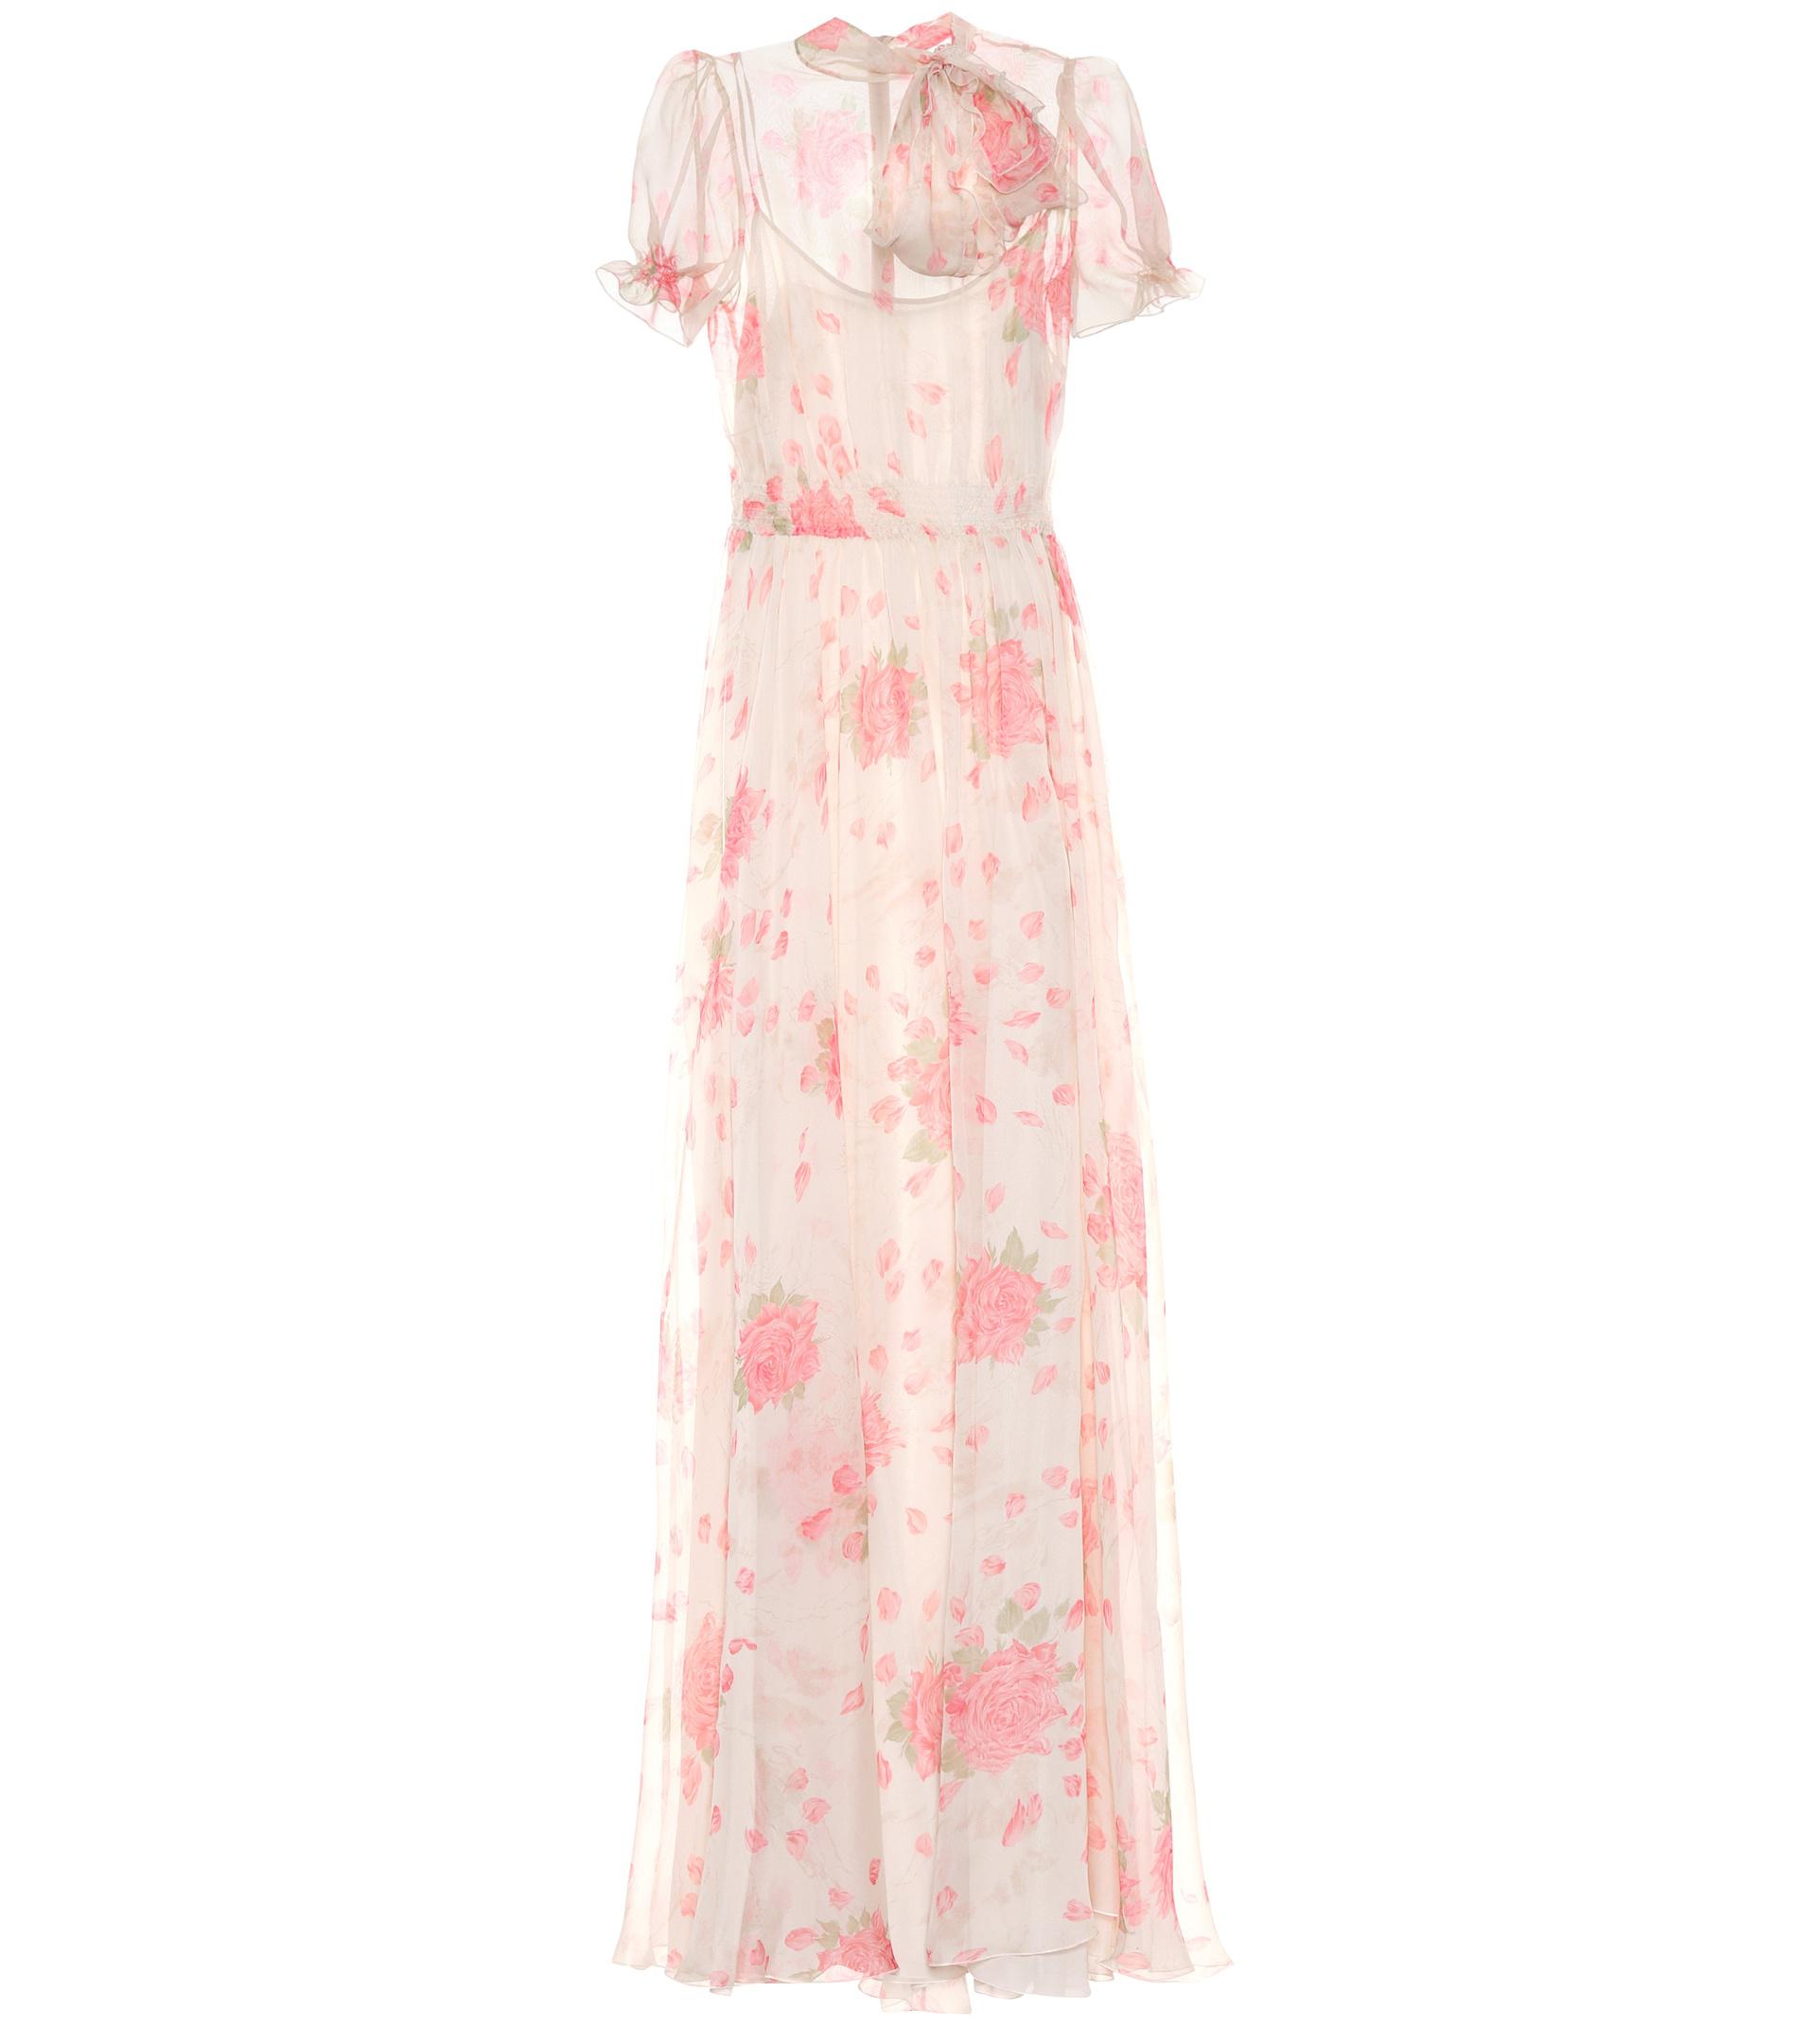 Lyst - Valentino Floral-printed Silk-chiffon Gown in Pink